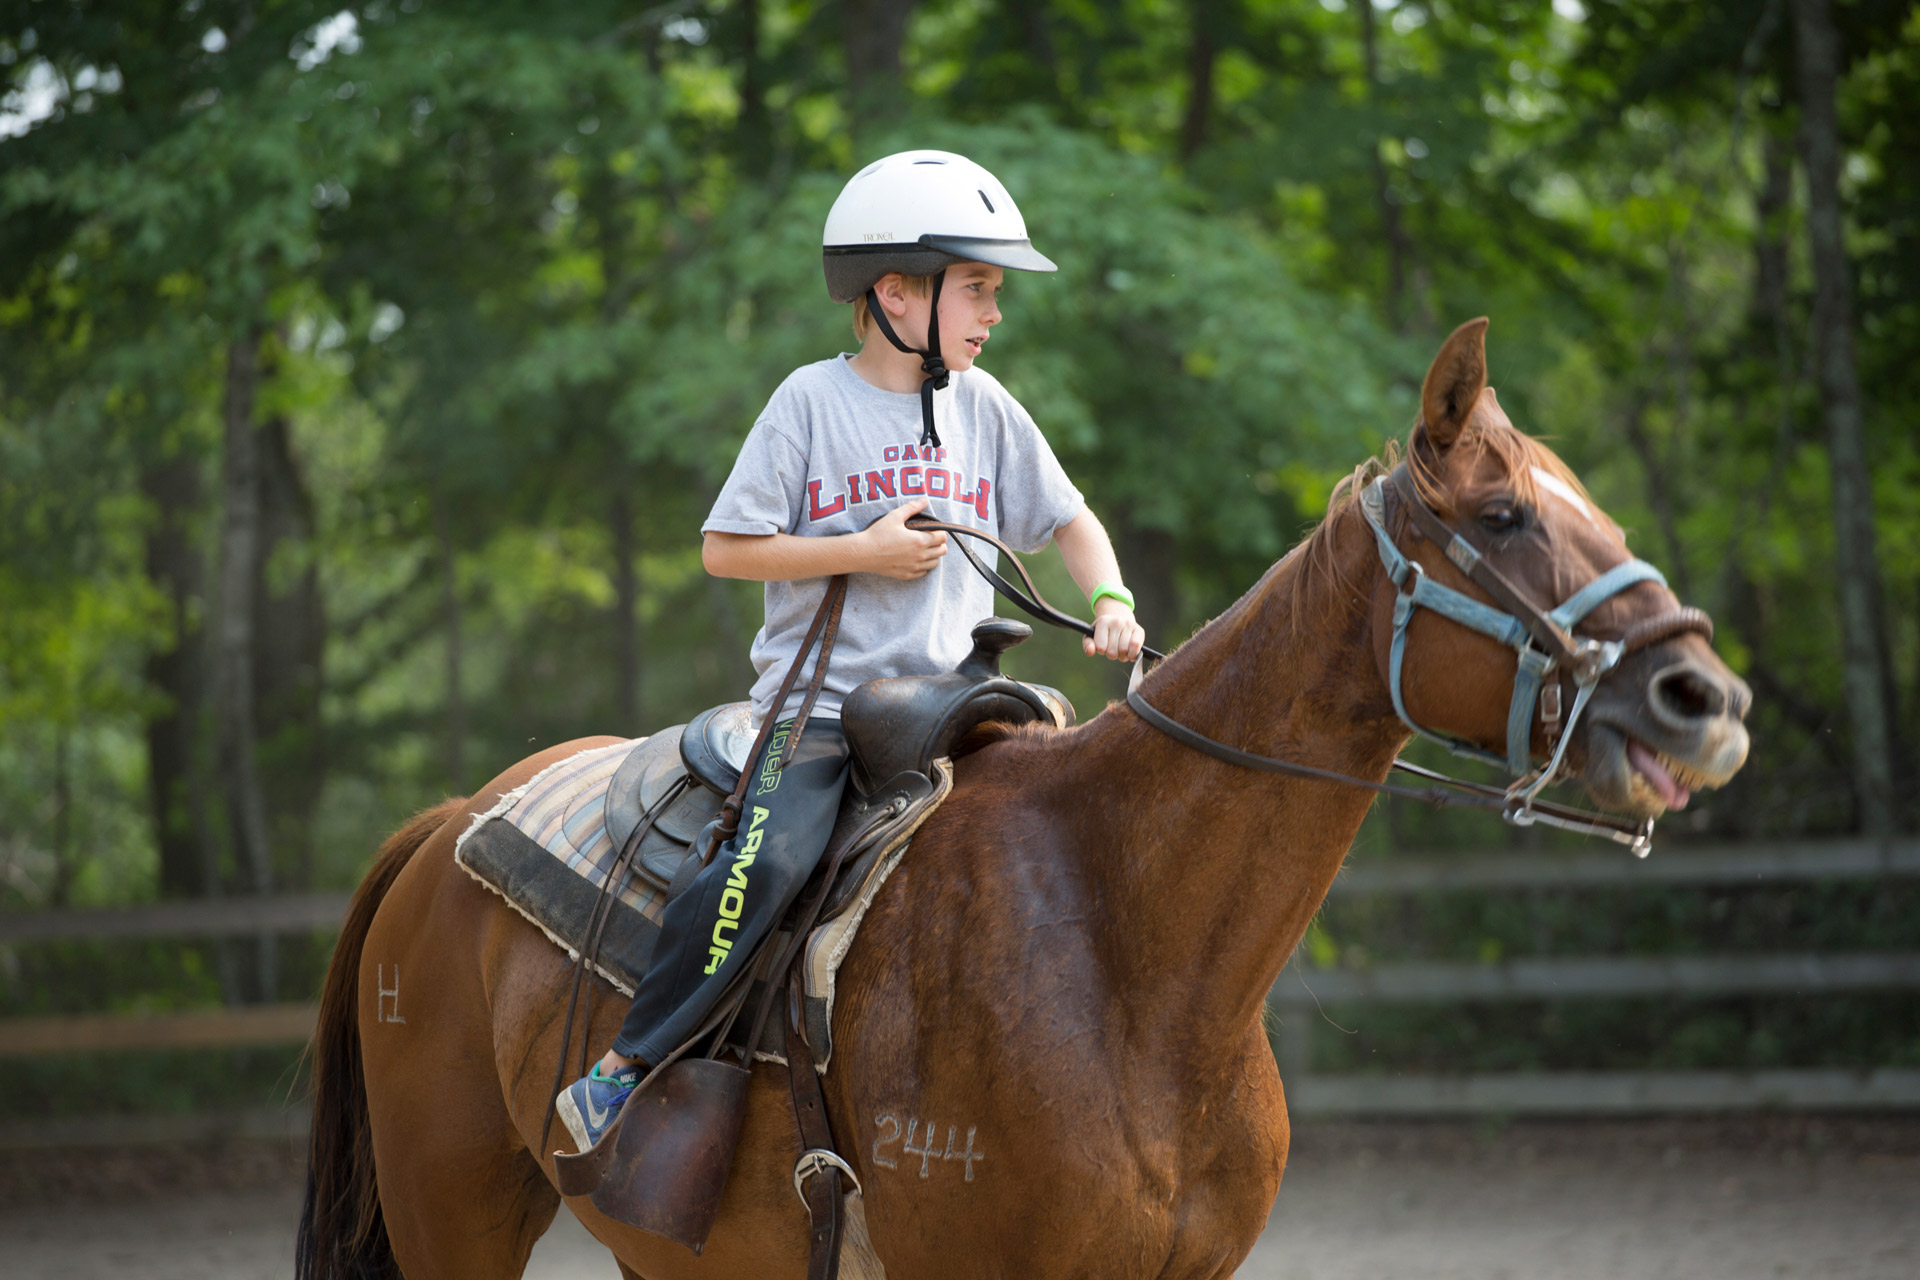 What are some ways to gain confidence riding horses?